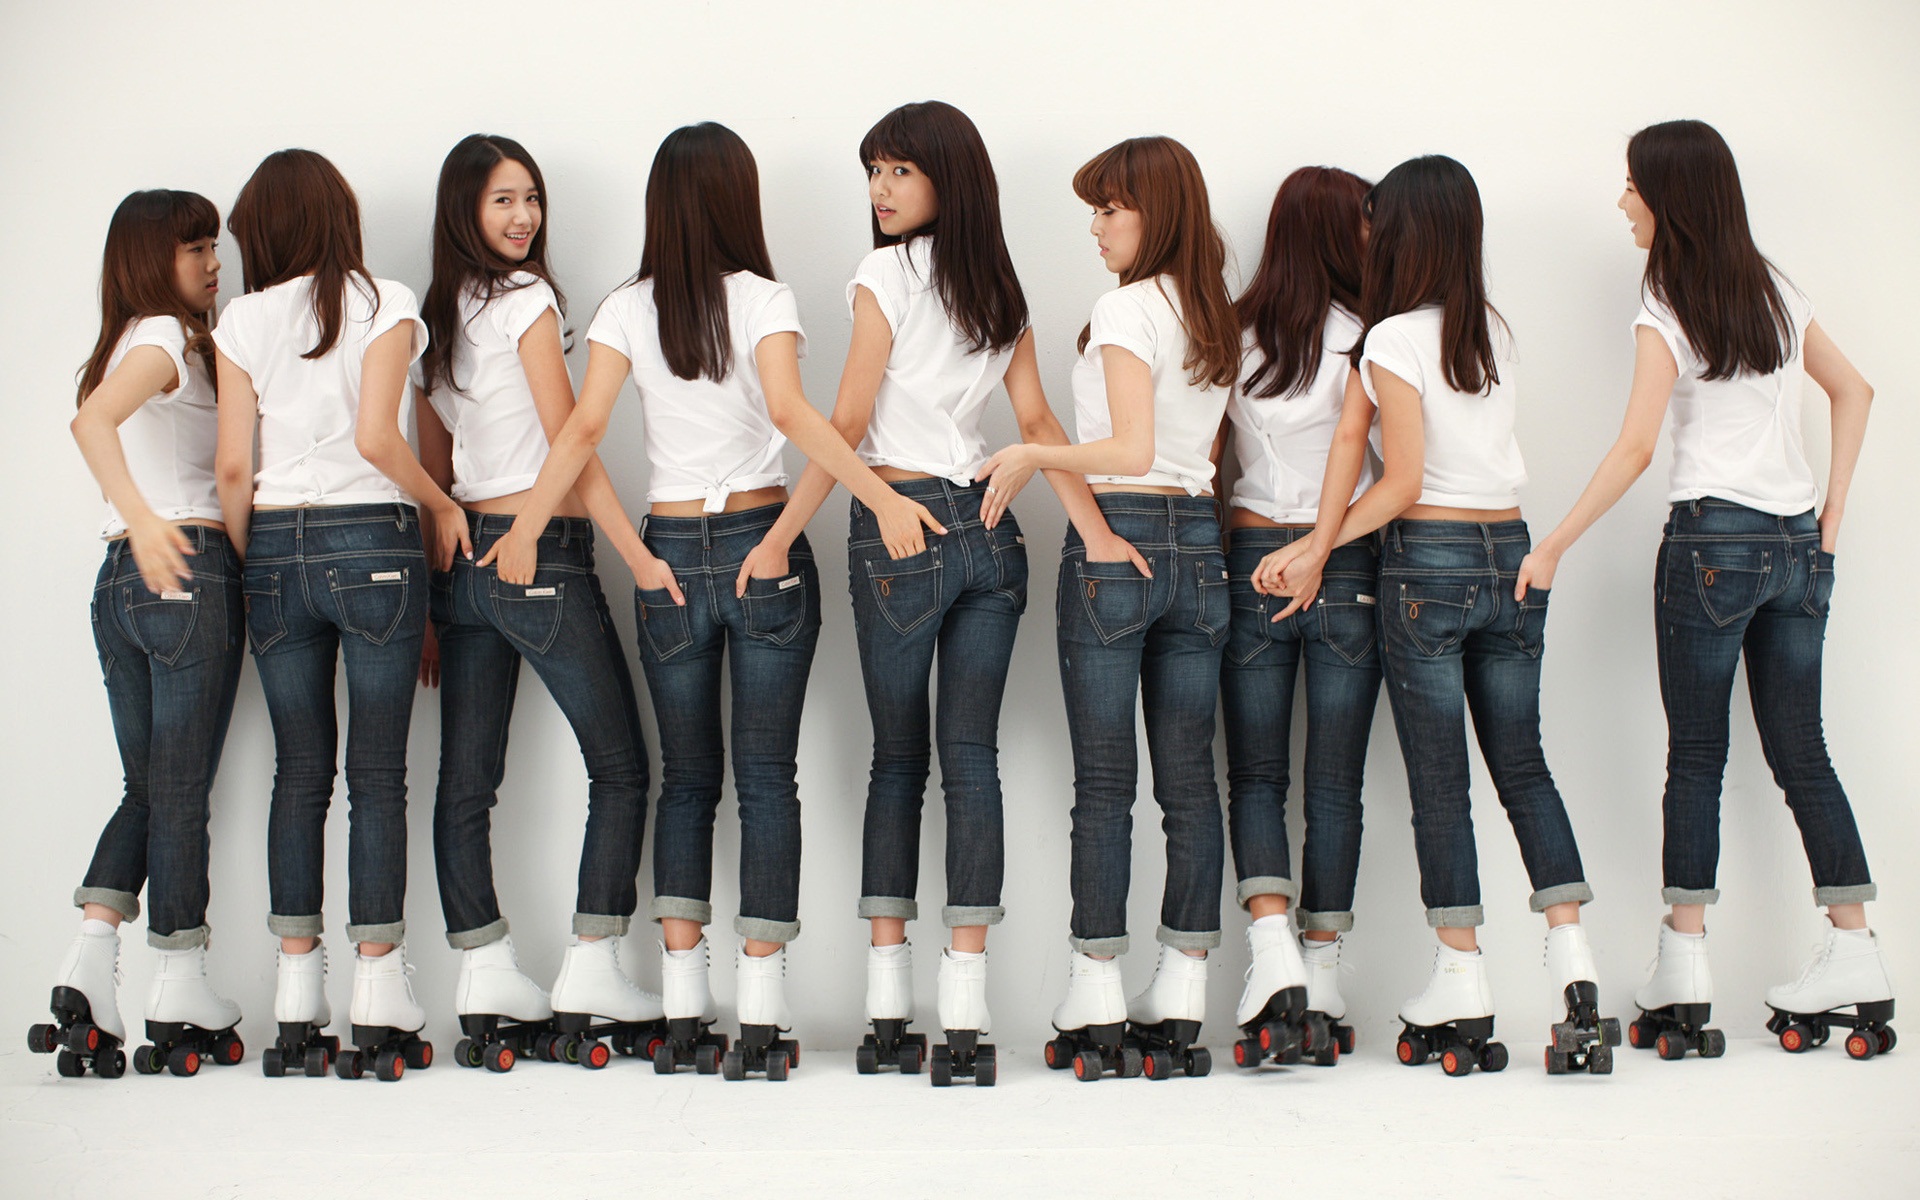 Girls Generation latest HD wallpapers collection #13 - 1920x1200